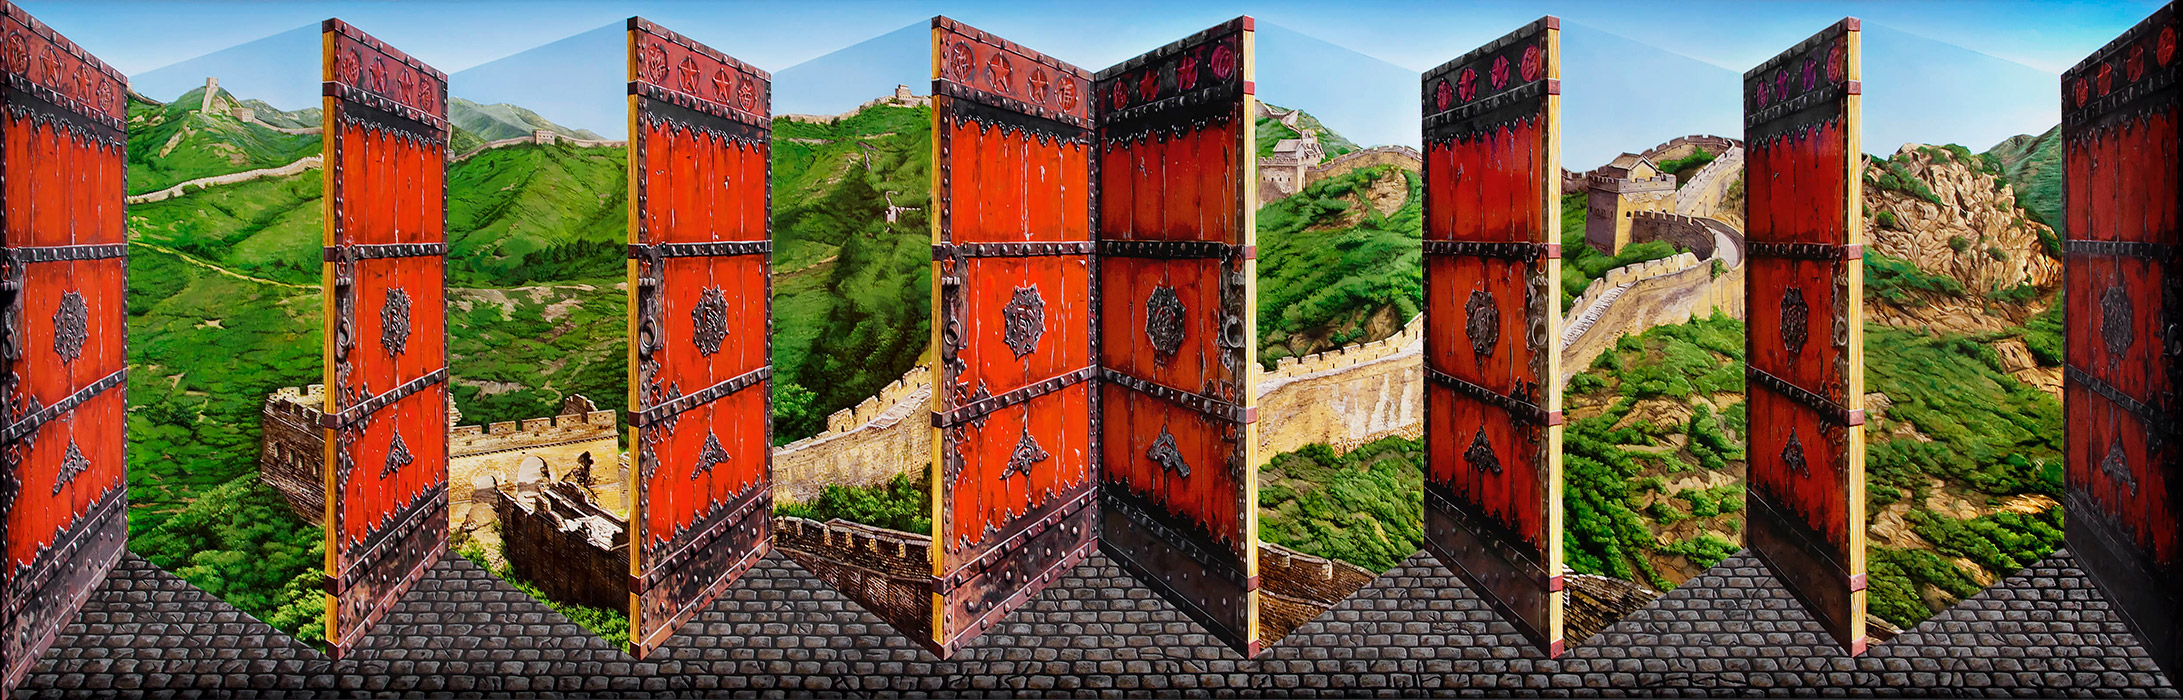 Doors to the Great Wall <p>2016 | 75 x 230 x 15 cm / 29½ x 90½ x 5⅞ in</p>
